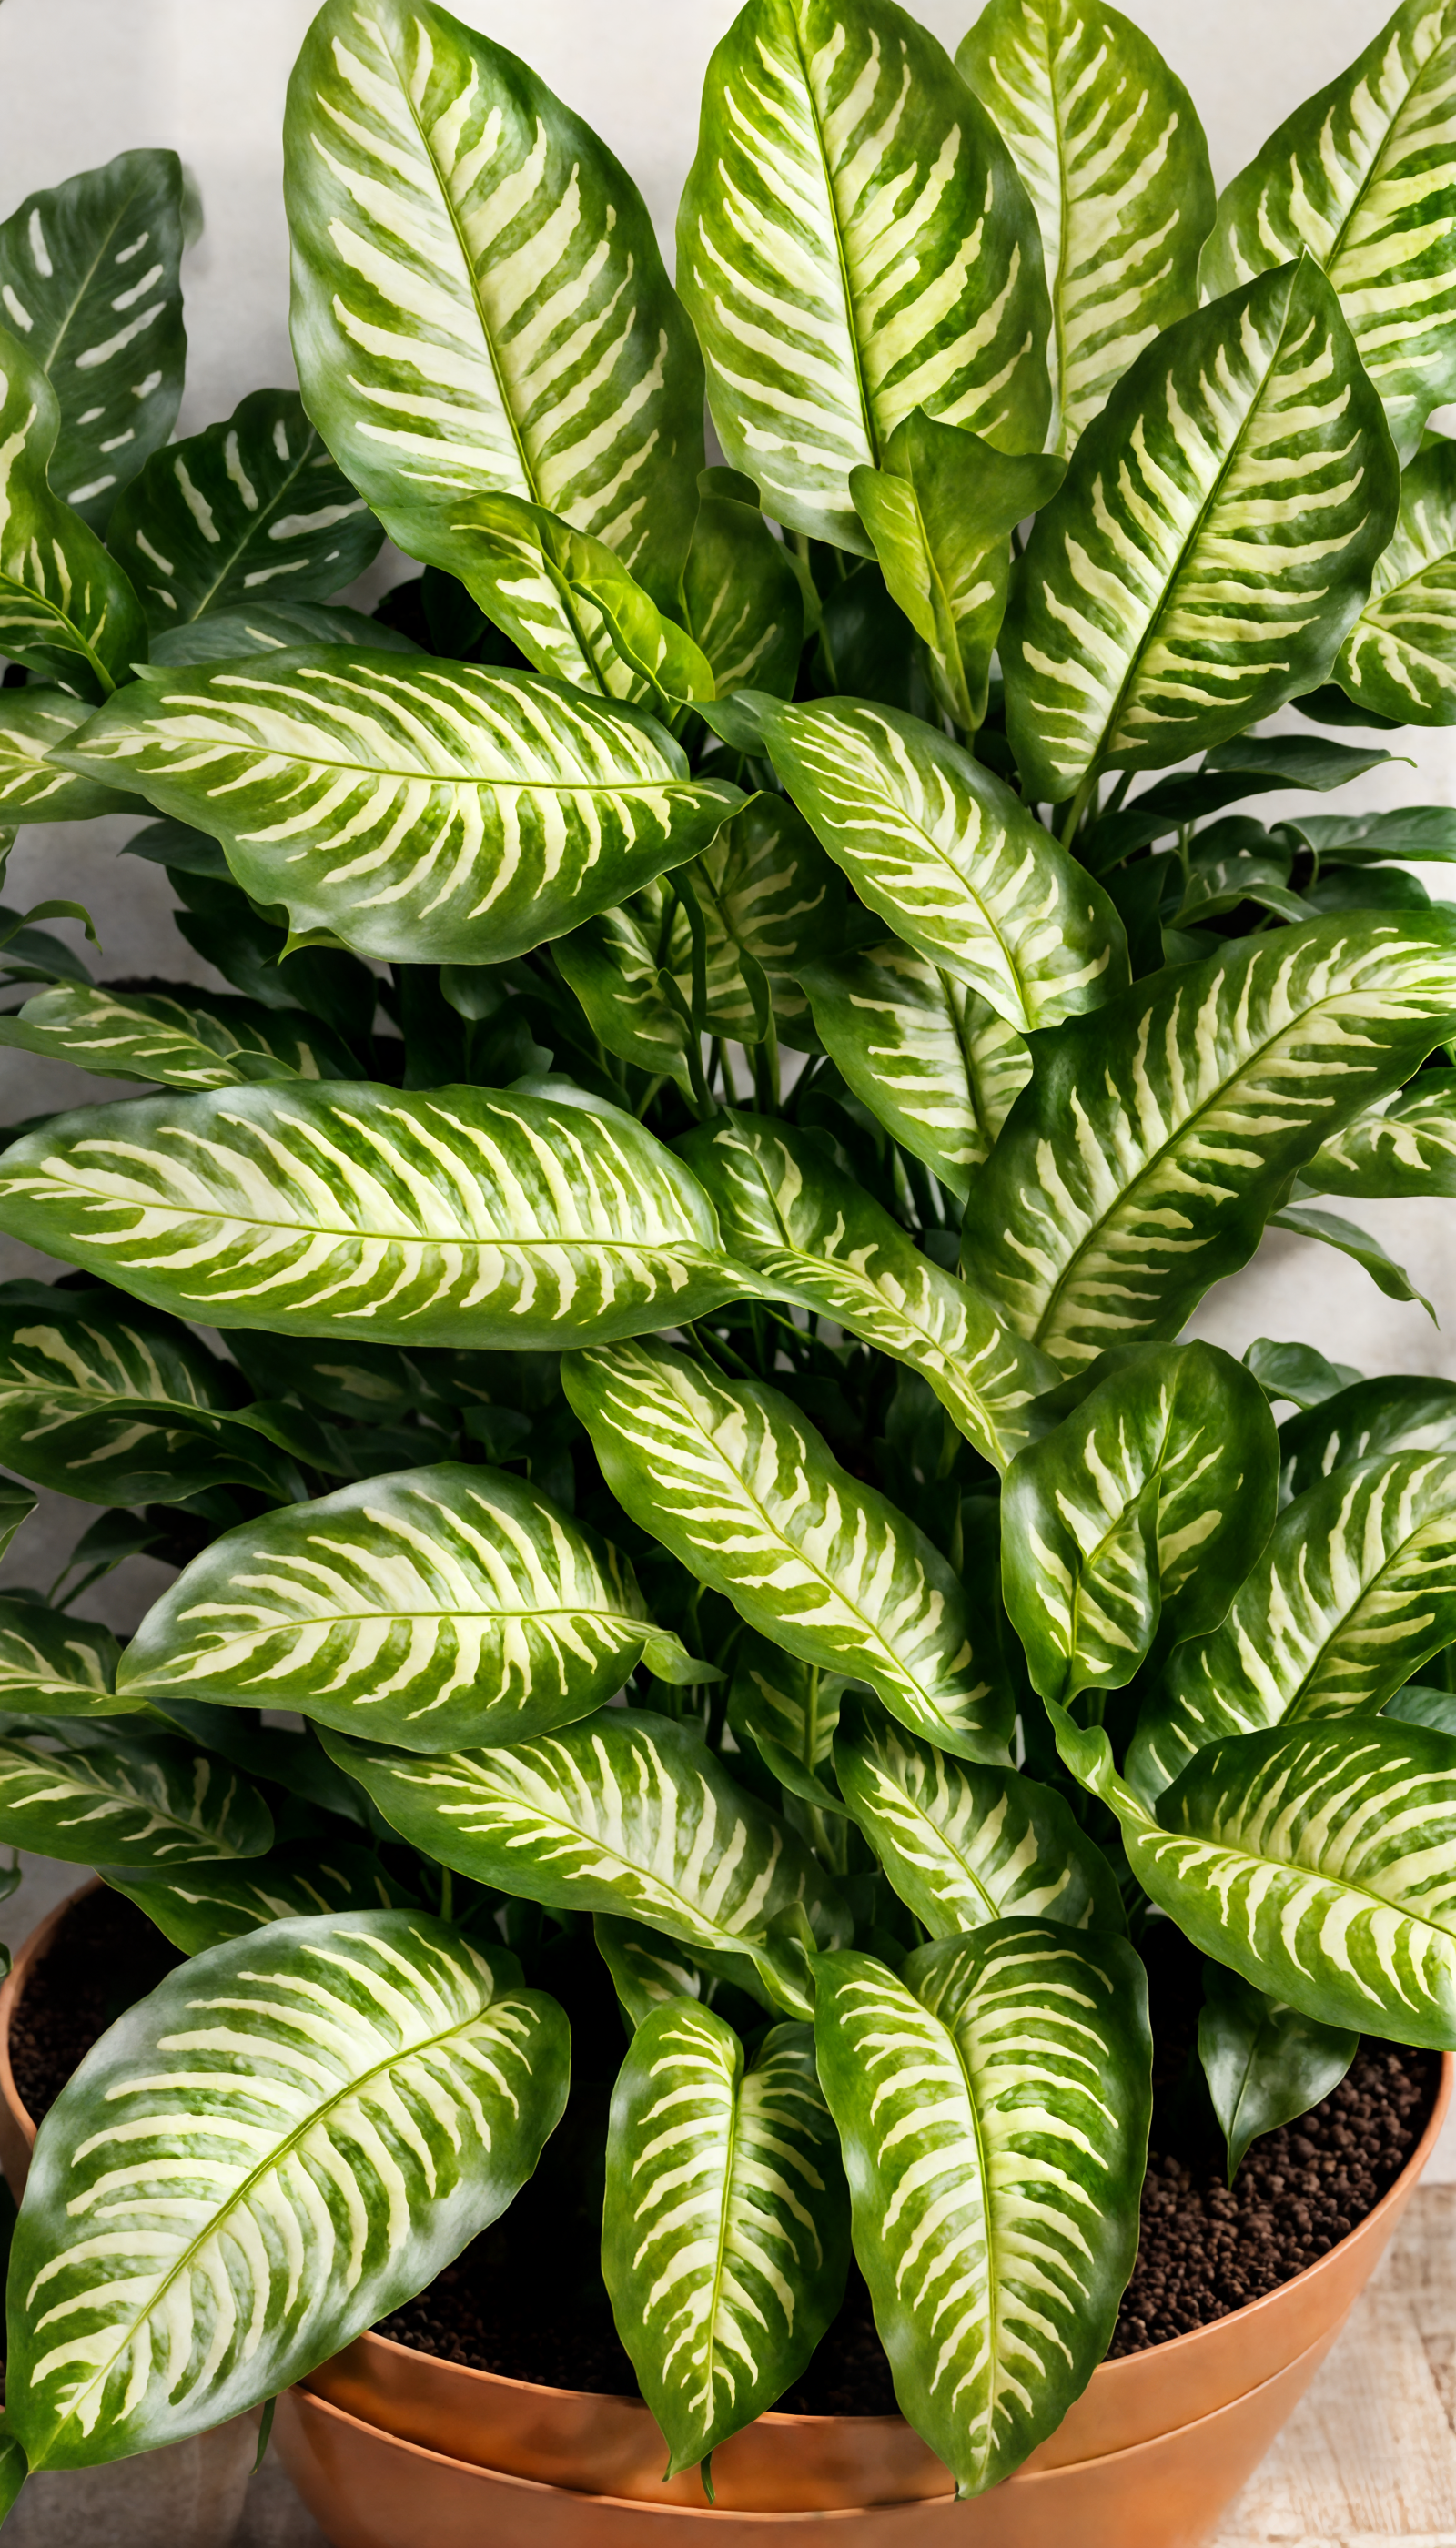 Dieffenbachia seguine in a bowl planter, with lush leaves, part of indoor decor, under clear lighting.